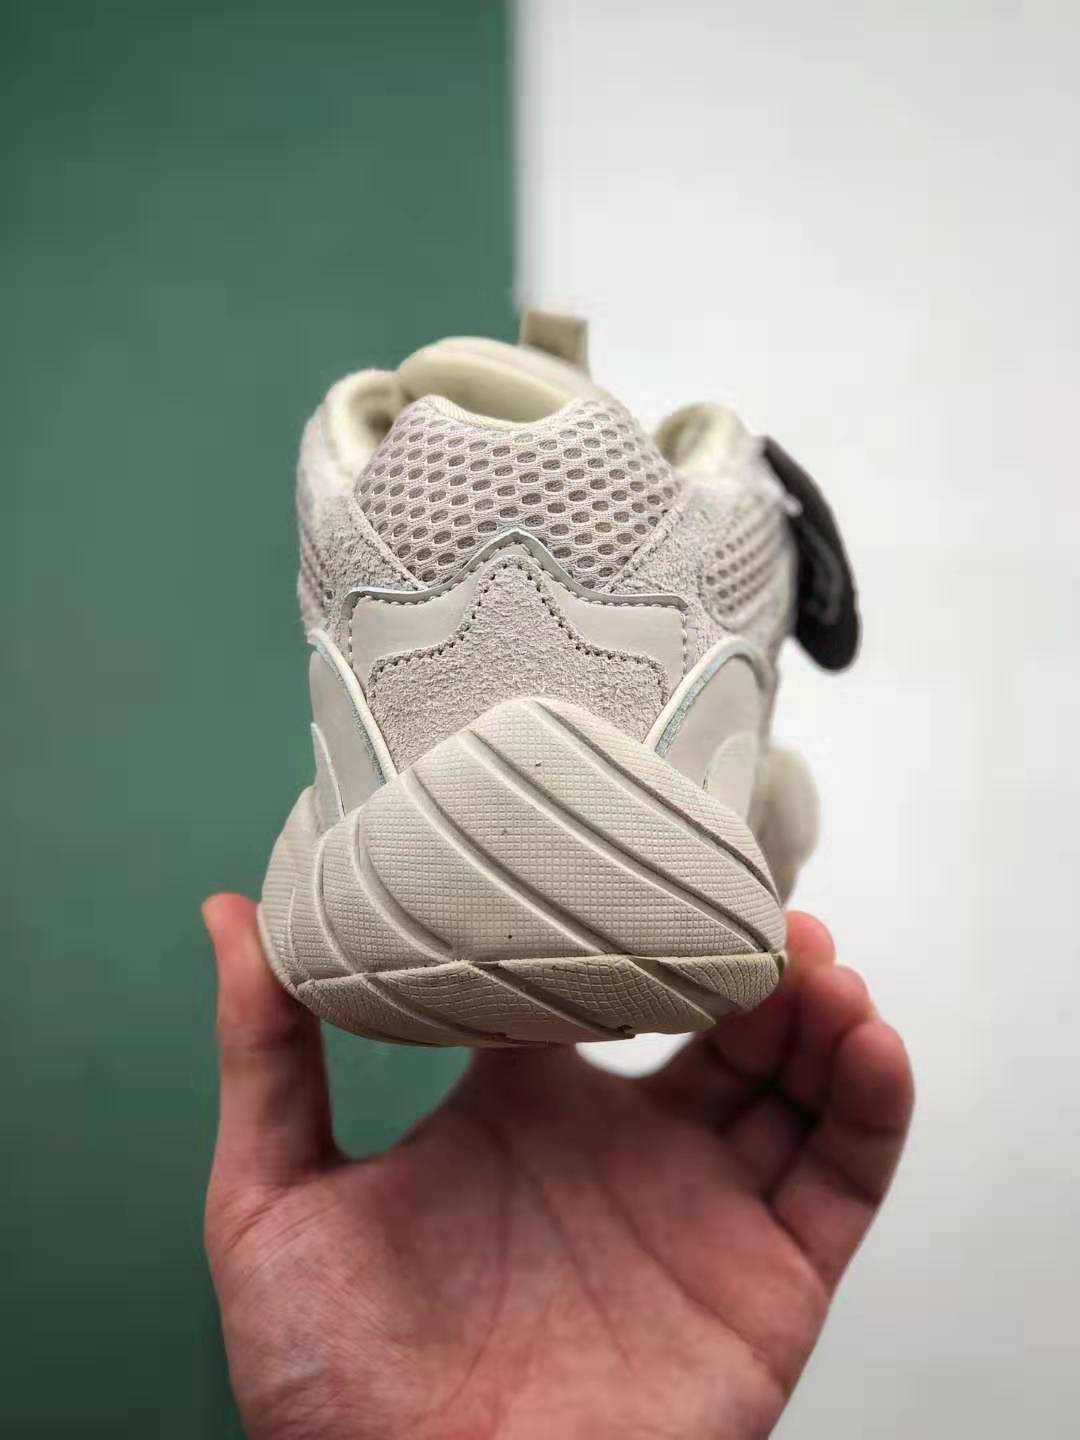 Adidas Yeezy 500 Blush DB2908 – Shop Now for Premium Sneakers!